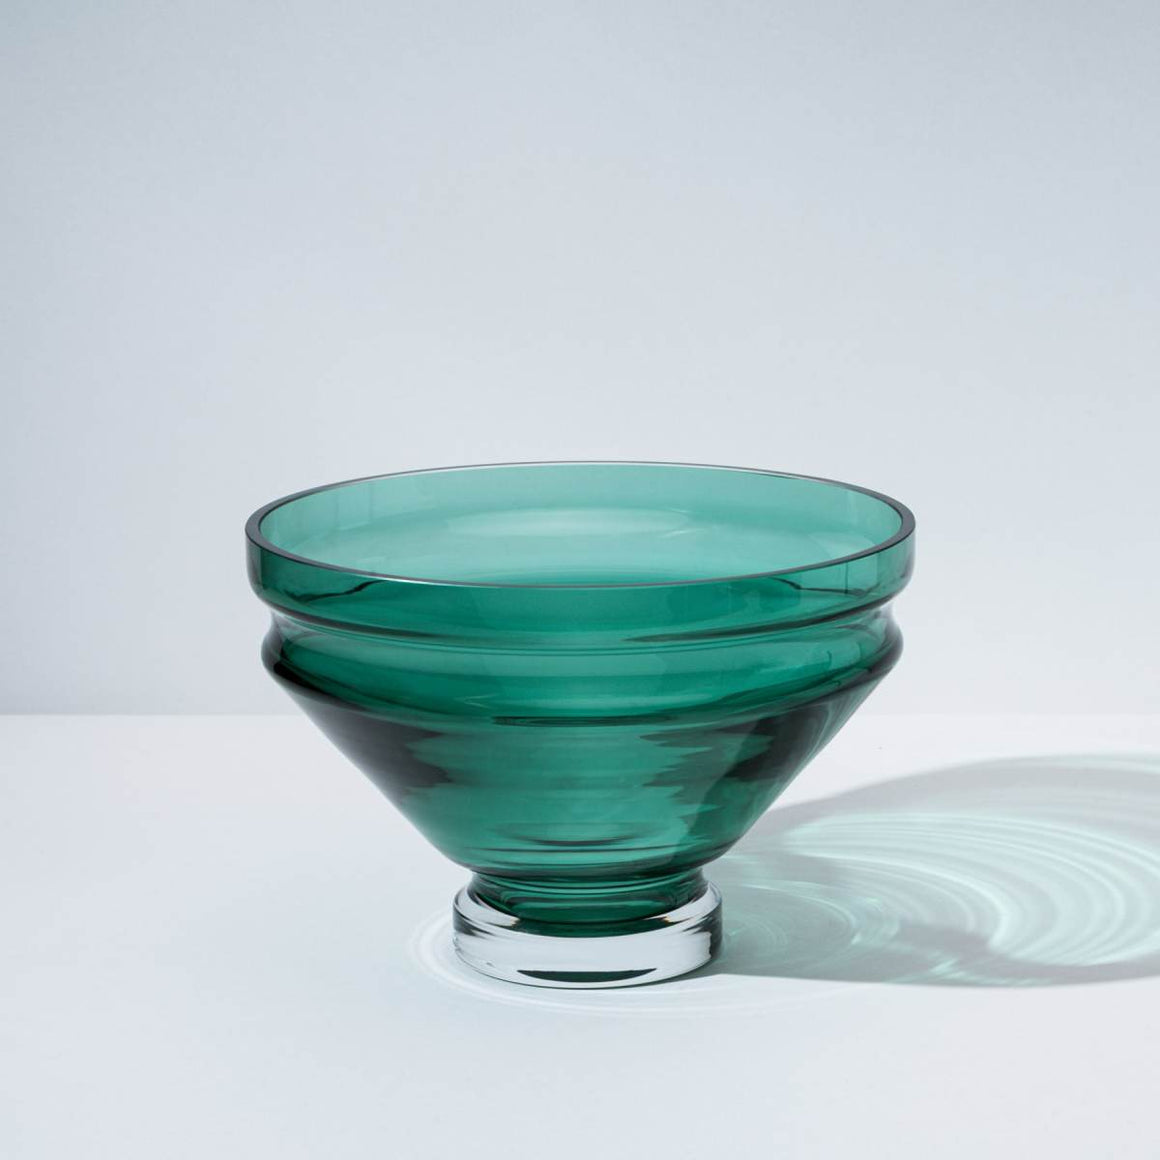 A green glass bowl with grooves at the top, which creates a rippling water effect in the bowl’s shadow